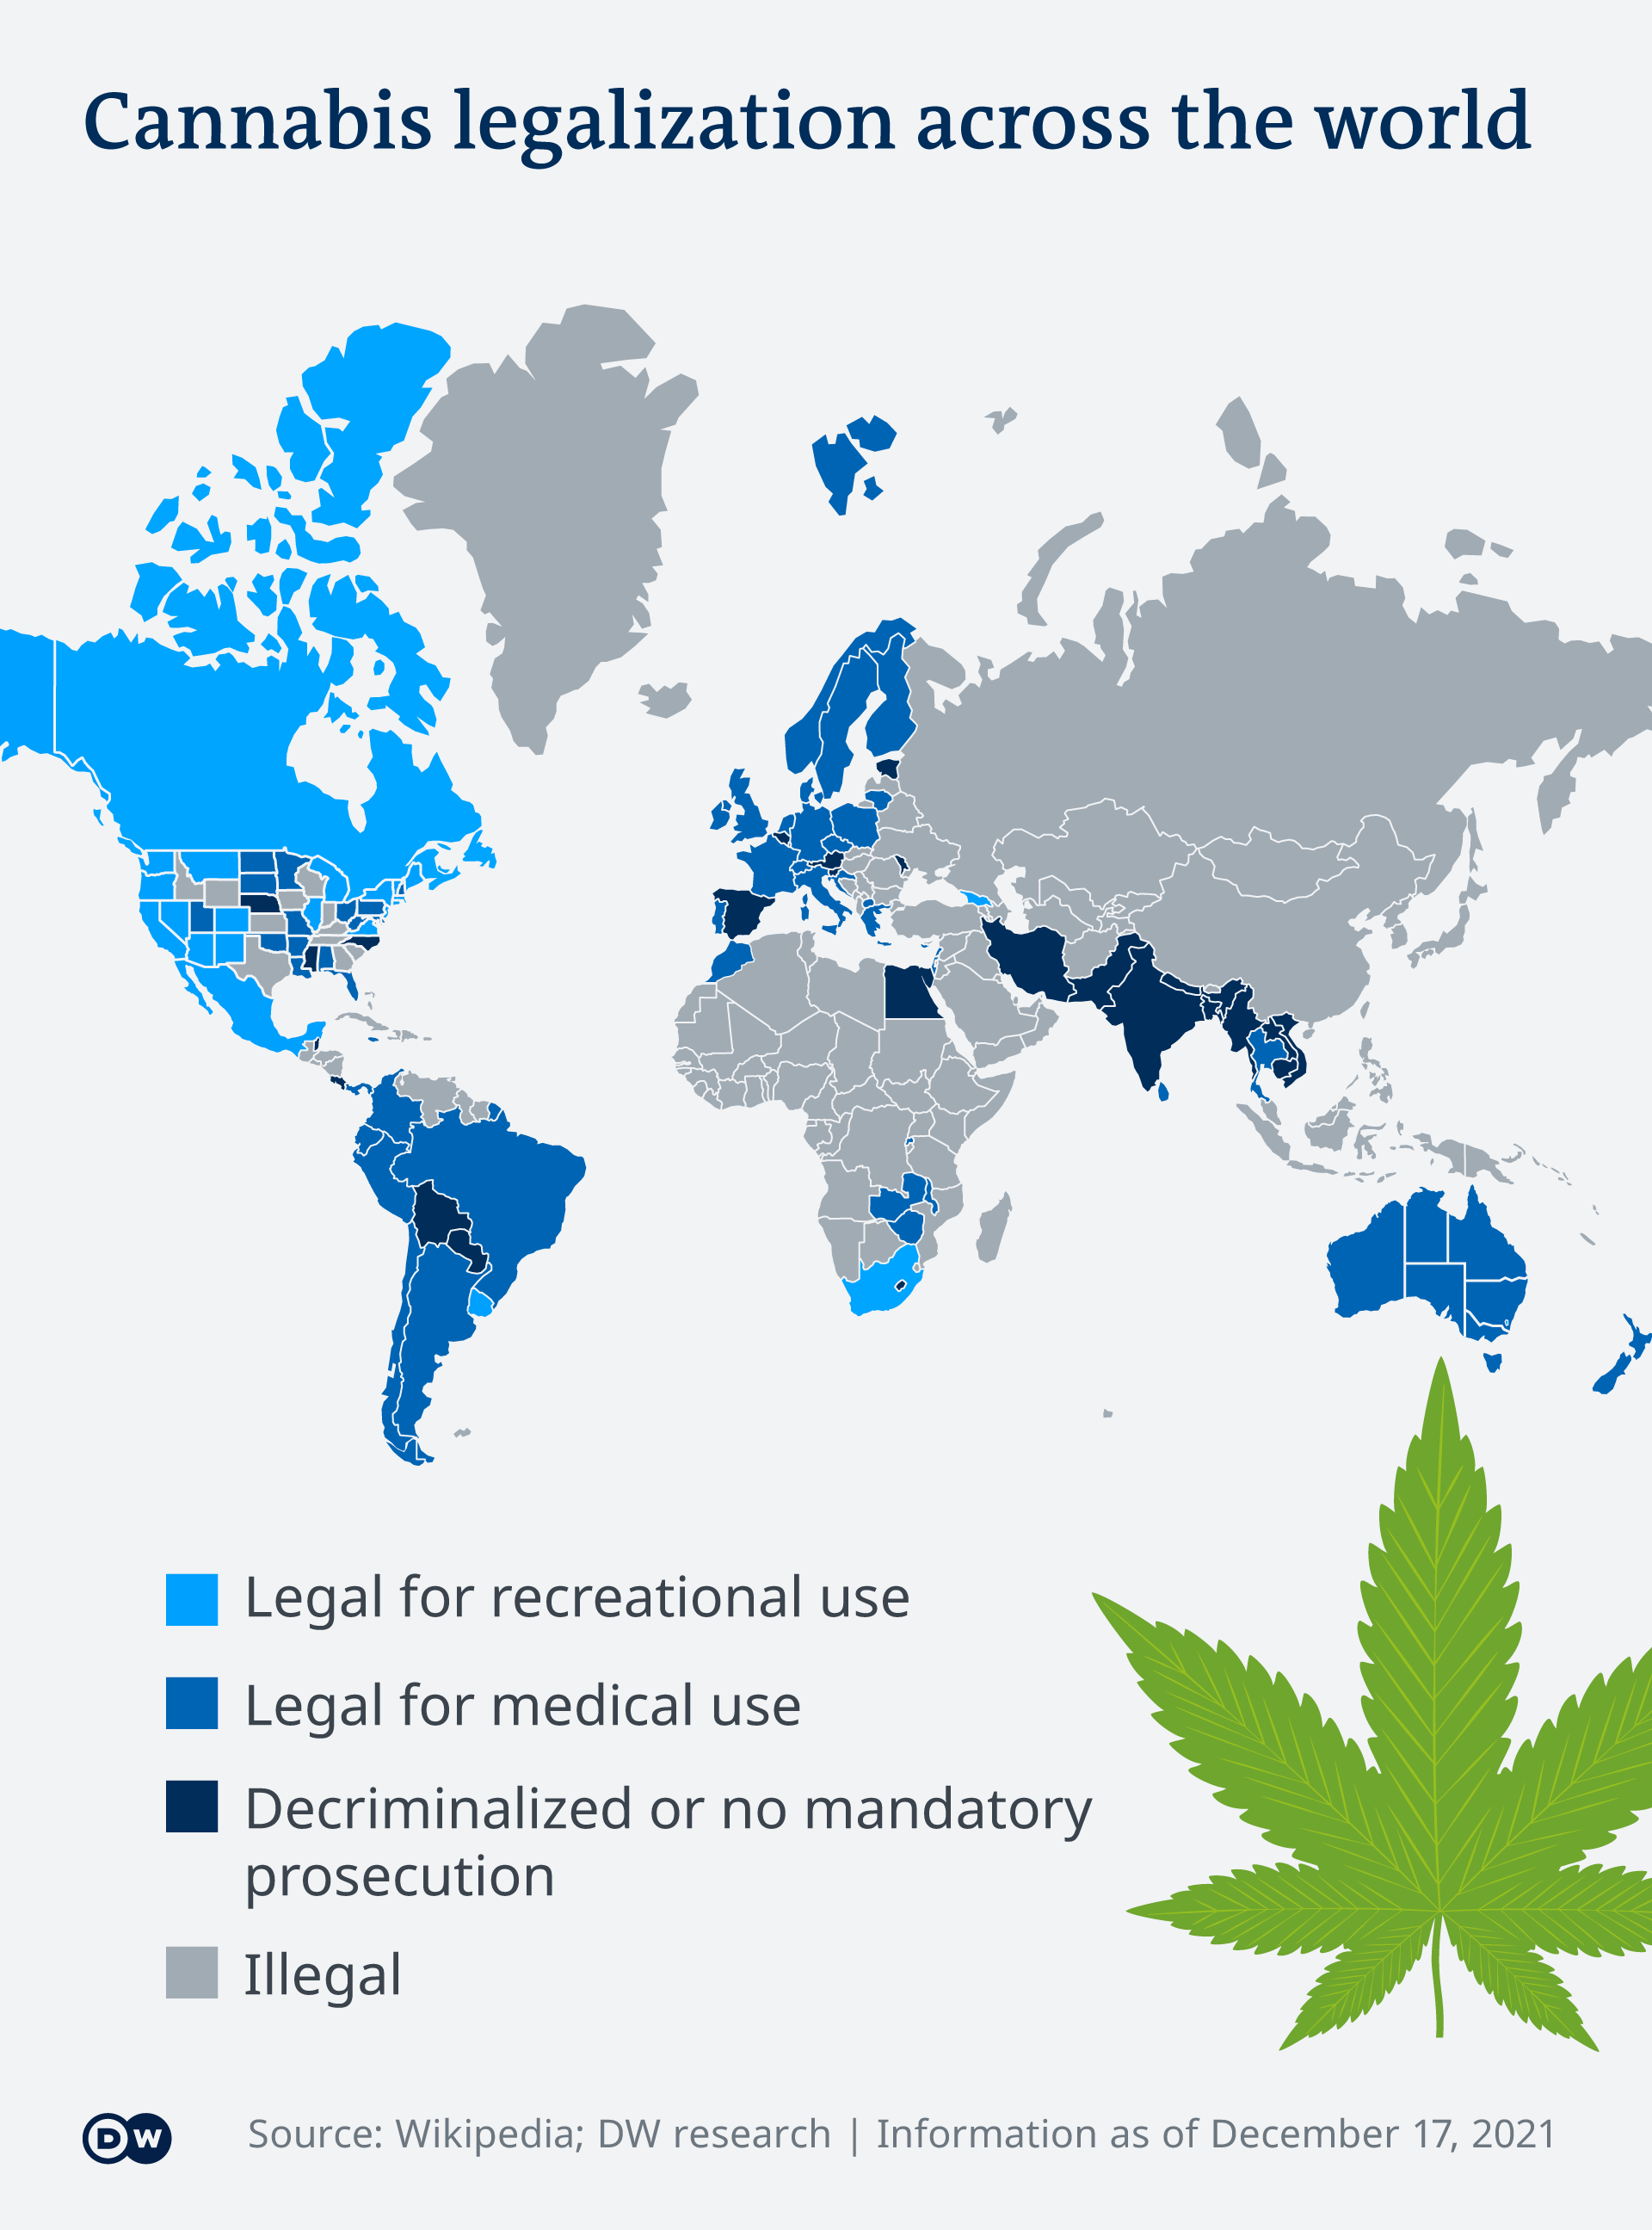 A world map showing which countries have legalized marijuana use